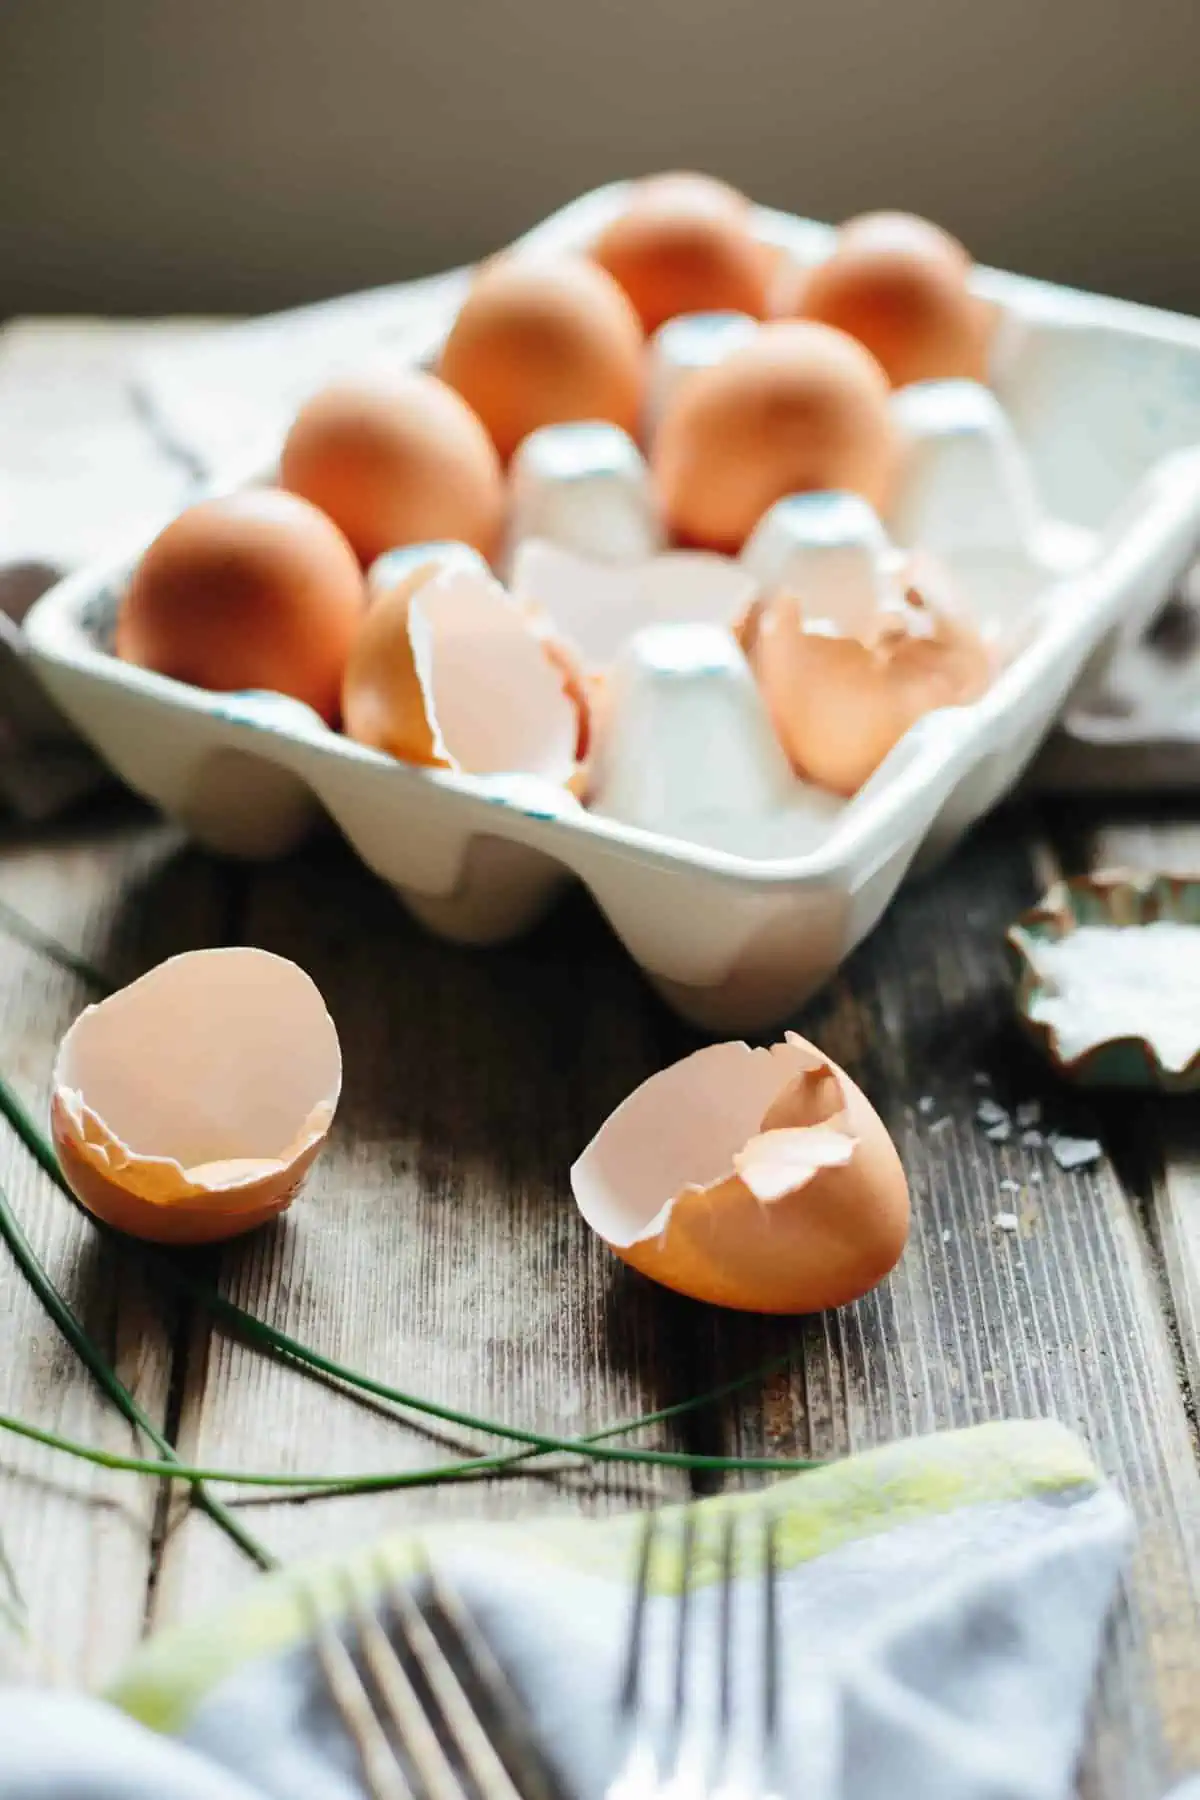 An egg carton with whole eggs and empty shells.